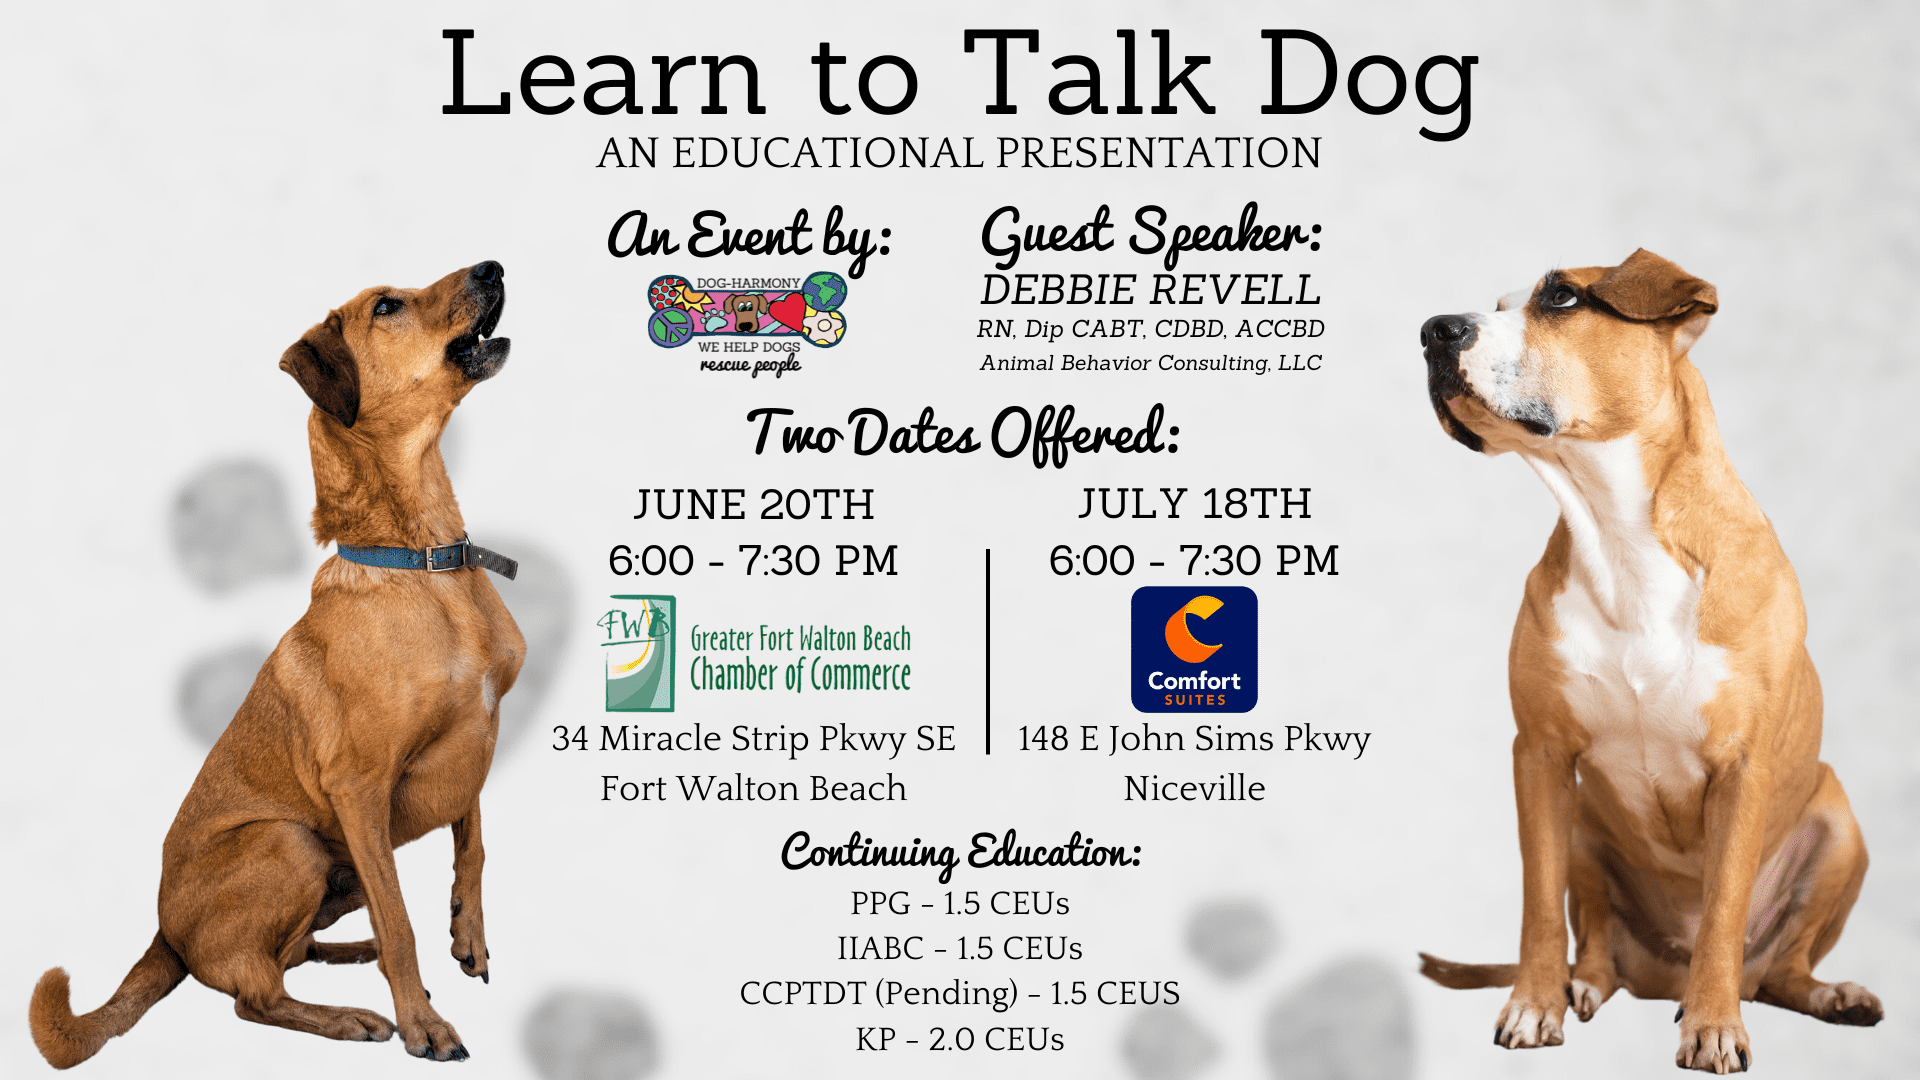 graphic for the "learn to talk dog" seminar feat. debbie revell on June 20th and July 18th